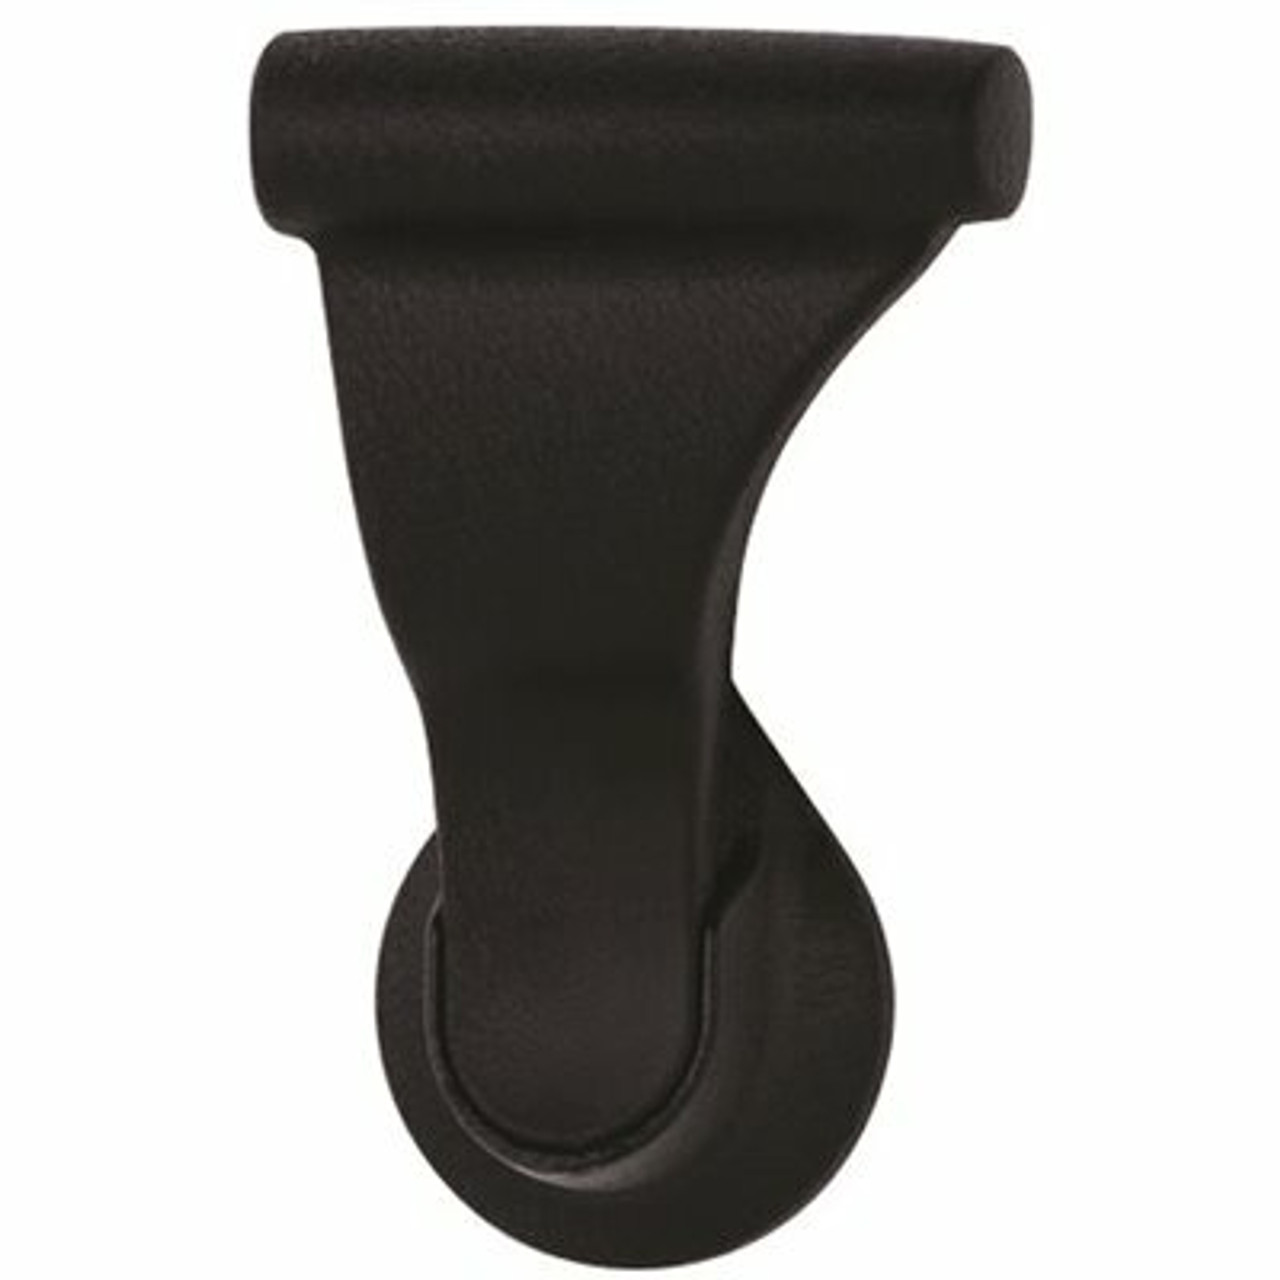 Soss 1-3/8 In. Textured Black Push/Pull Passage Hall/Closet Latch With 2-3/4 In. Door Lever Backset